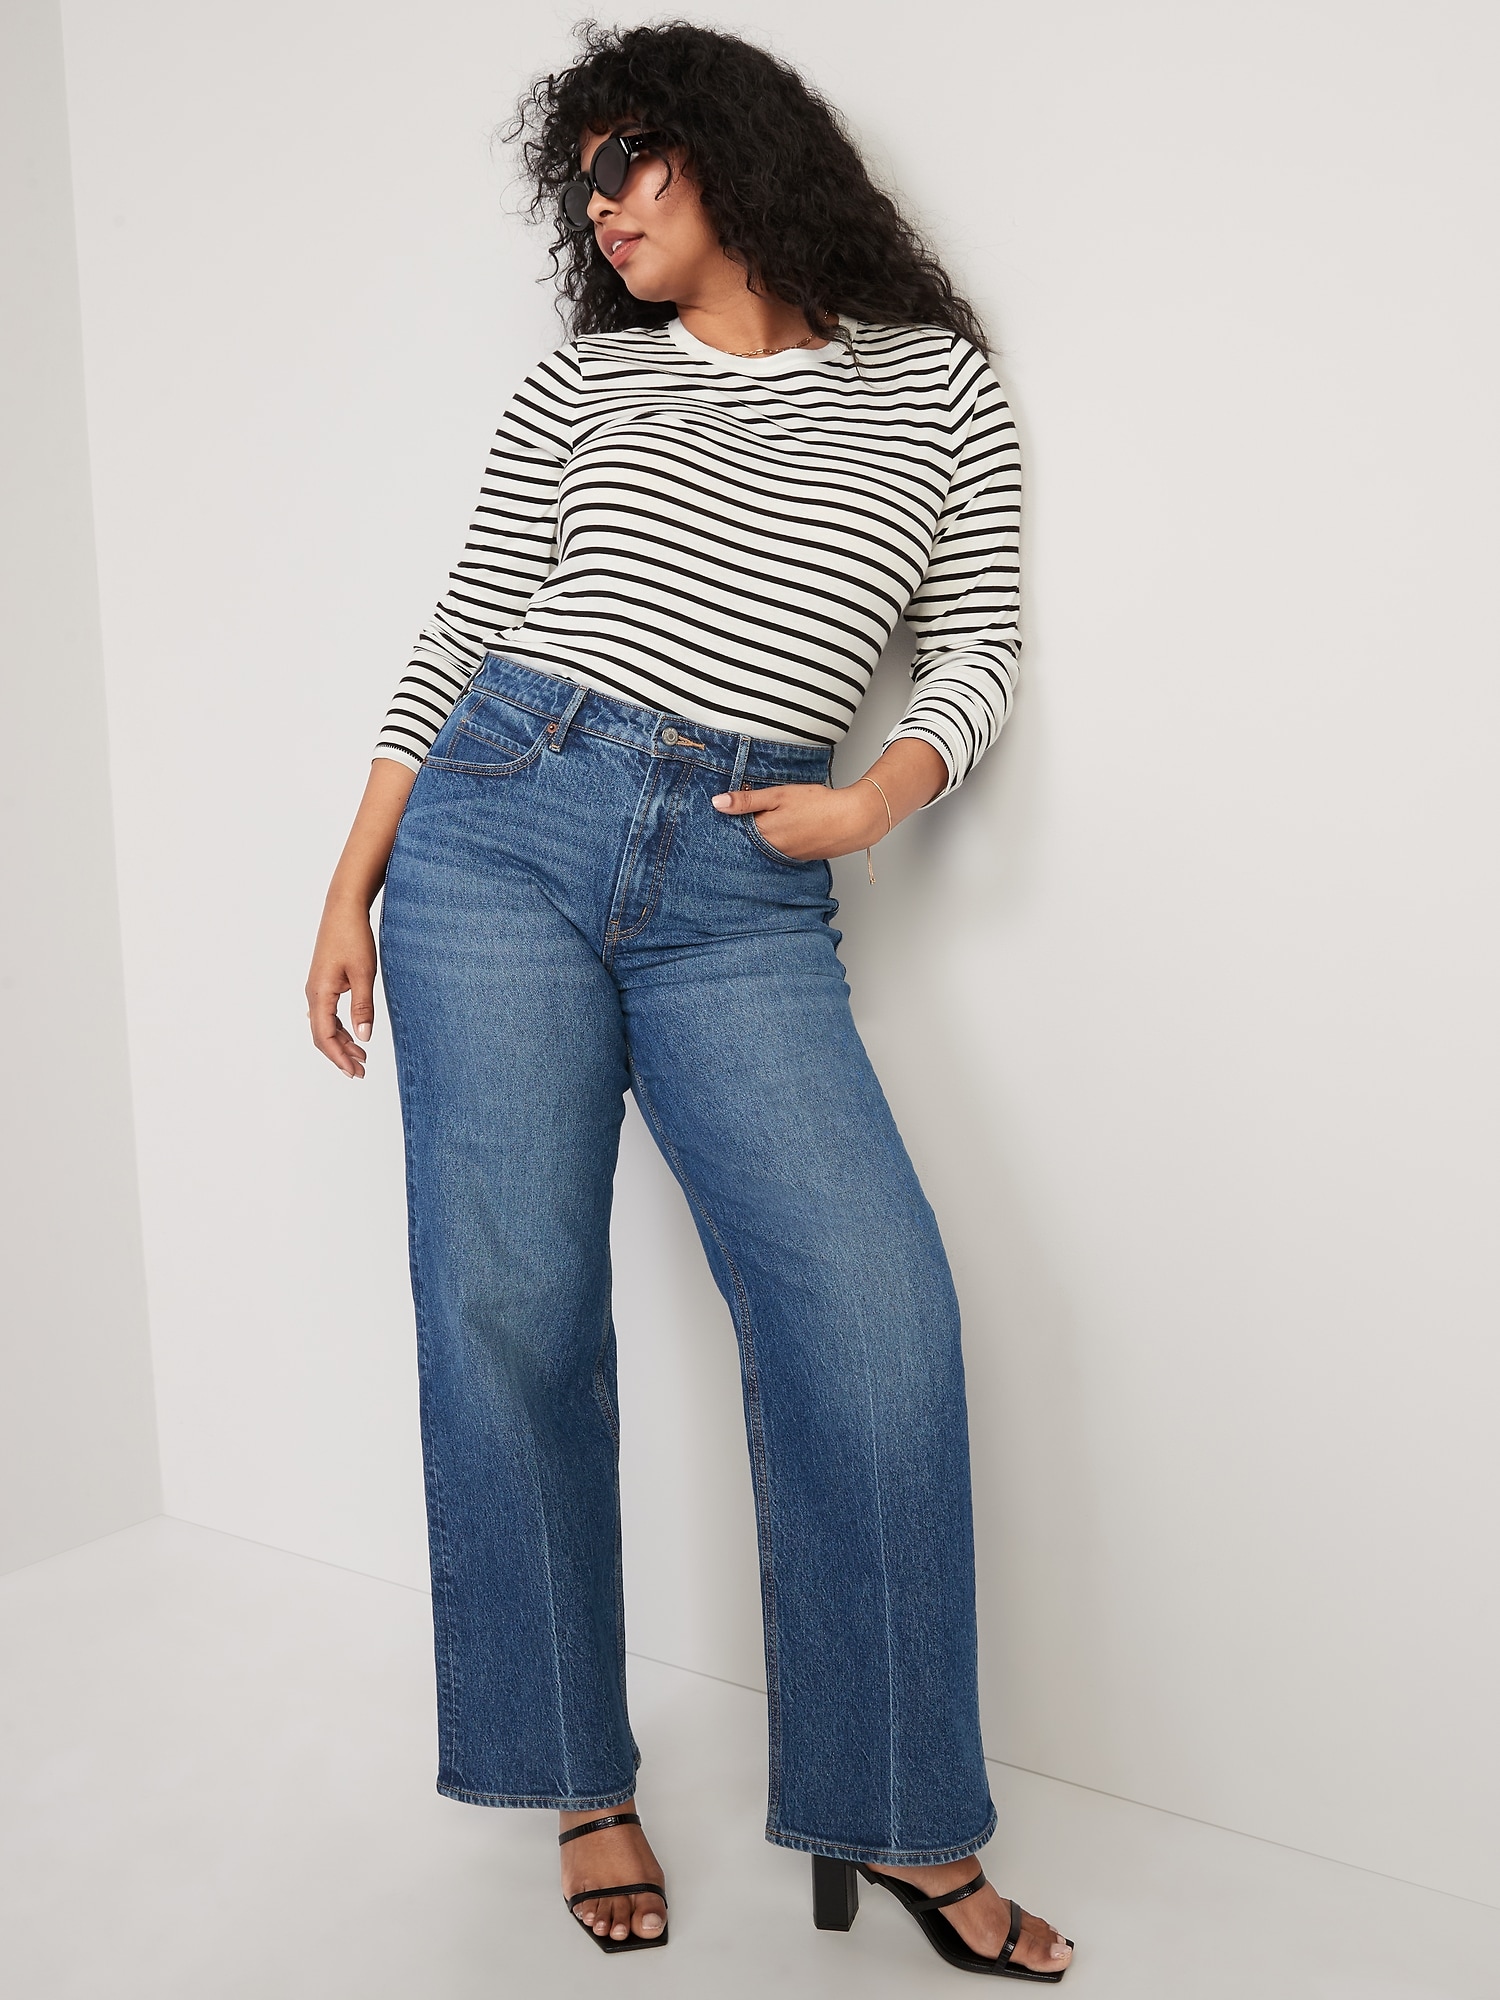 Long-Sleeve EveryWear Striped T-Shirt for Women | Old Navy